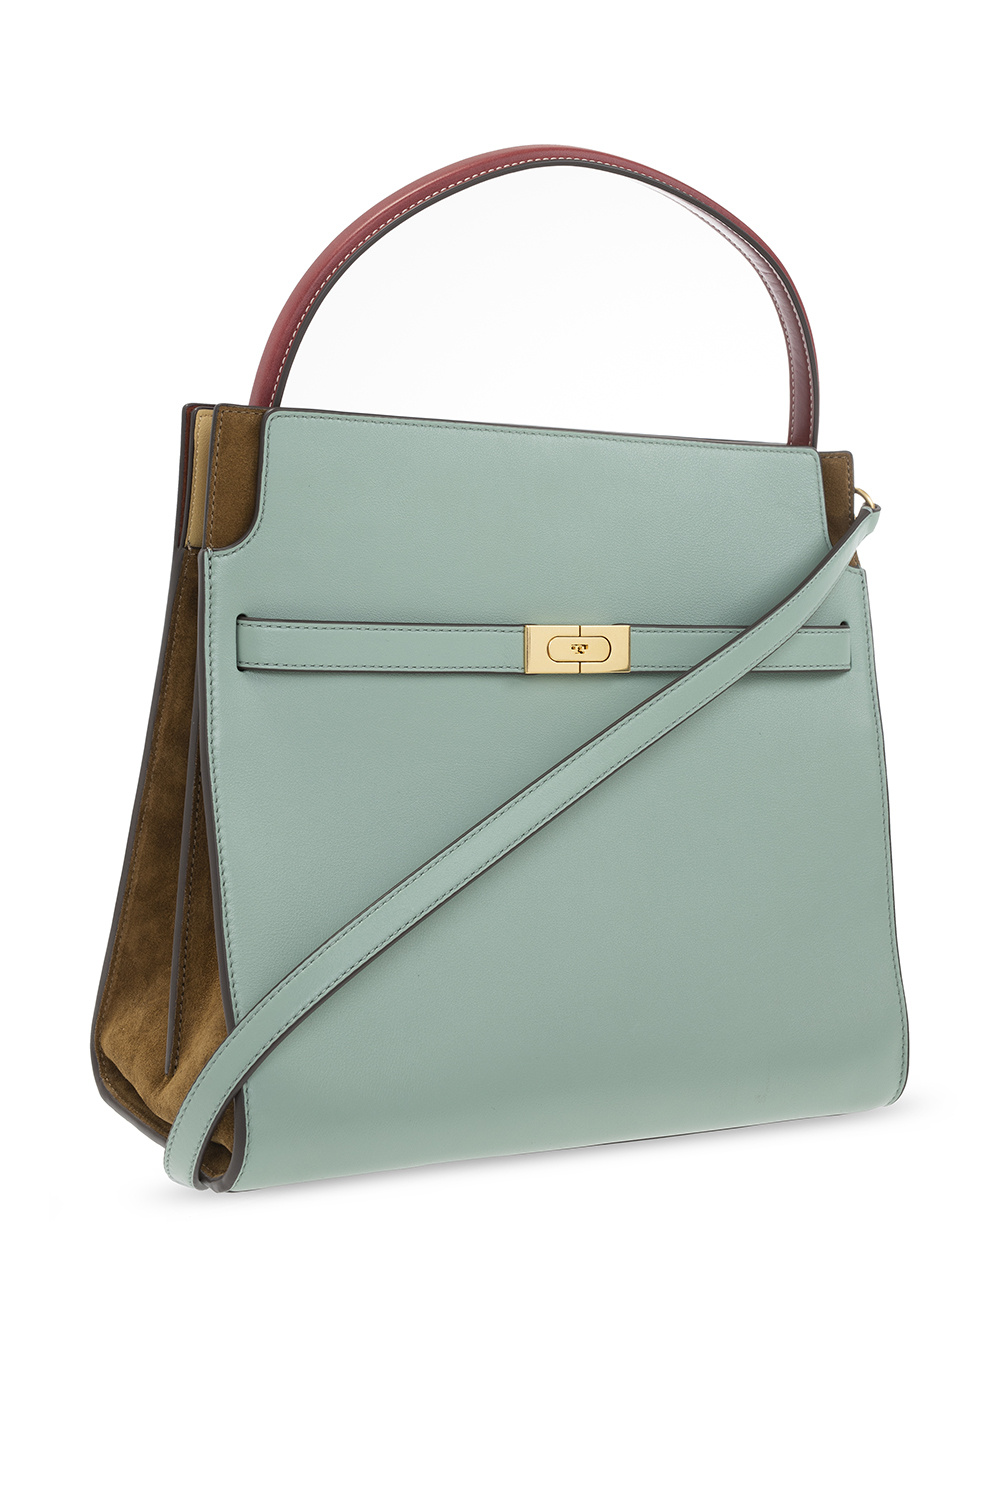 Tory Burch Green/Brown Leather and Suede Small Lee Radziwill Double Bag  Tory Burch